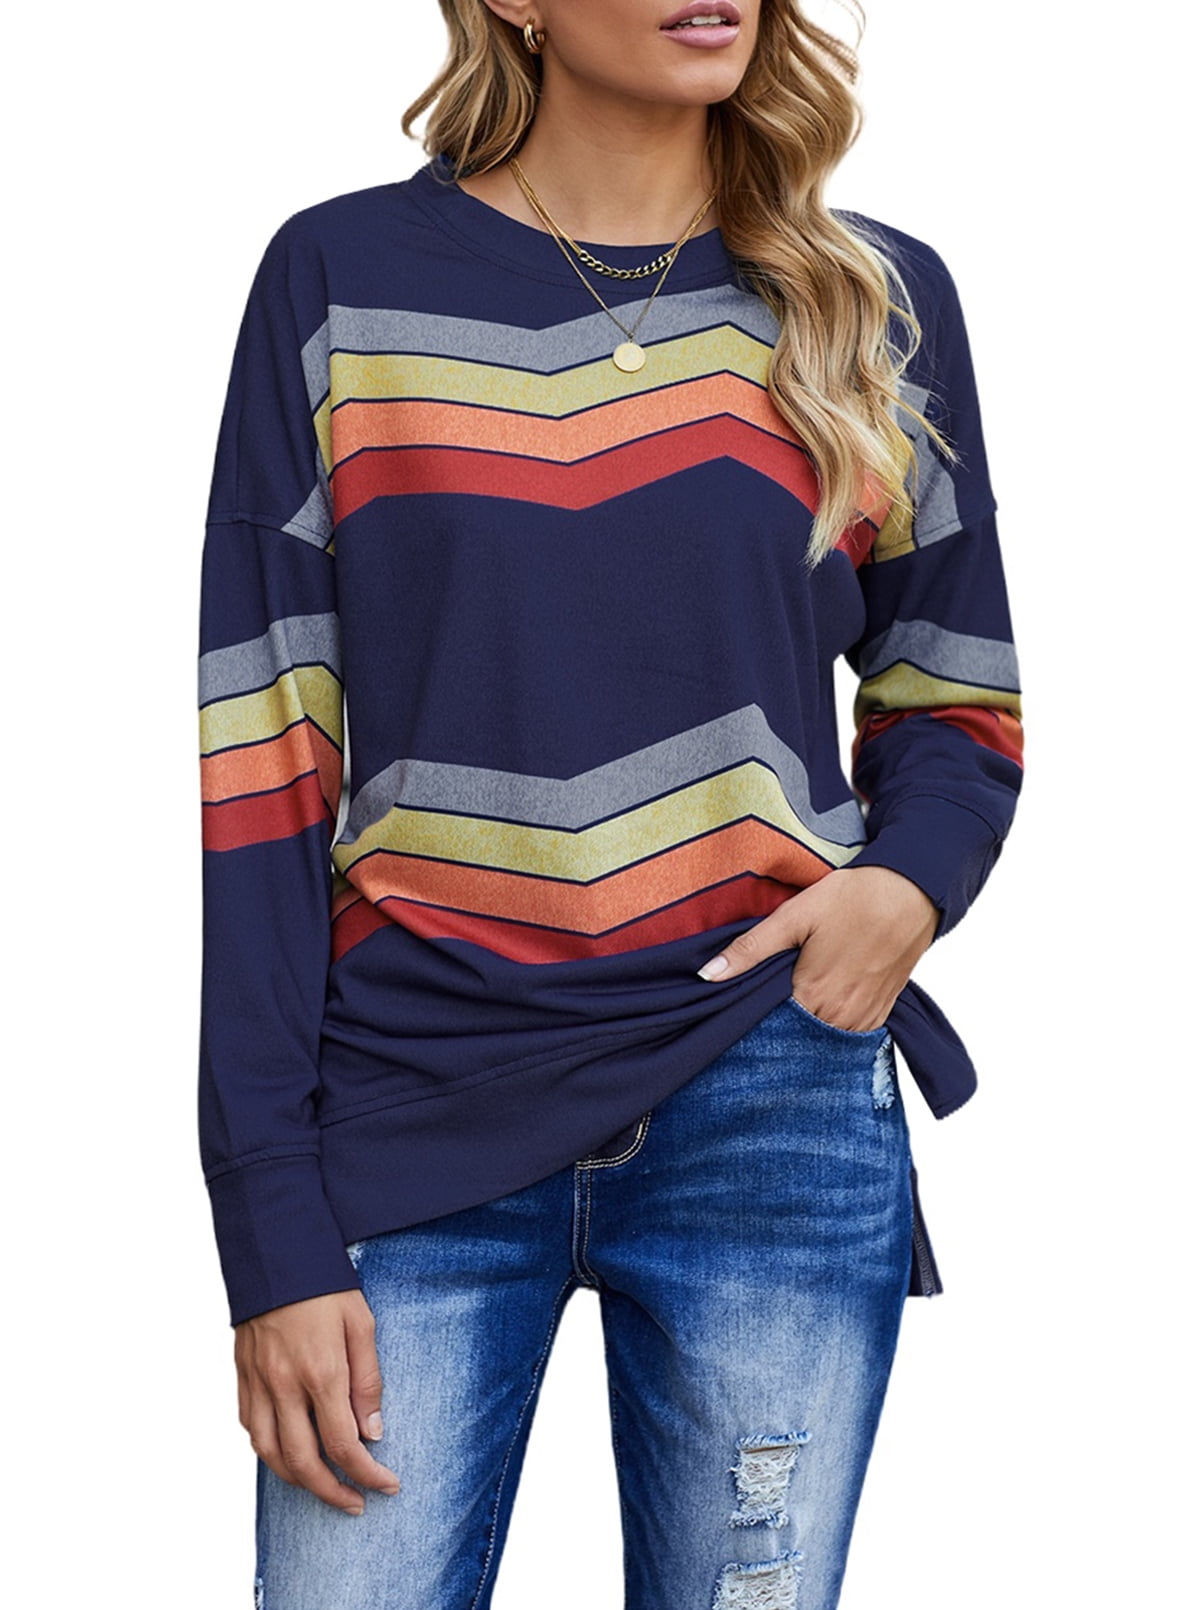 Famulily Women Casual Striped Colour Block Soft Long Sleeve Pullover Tunics Tops S-2XL 